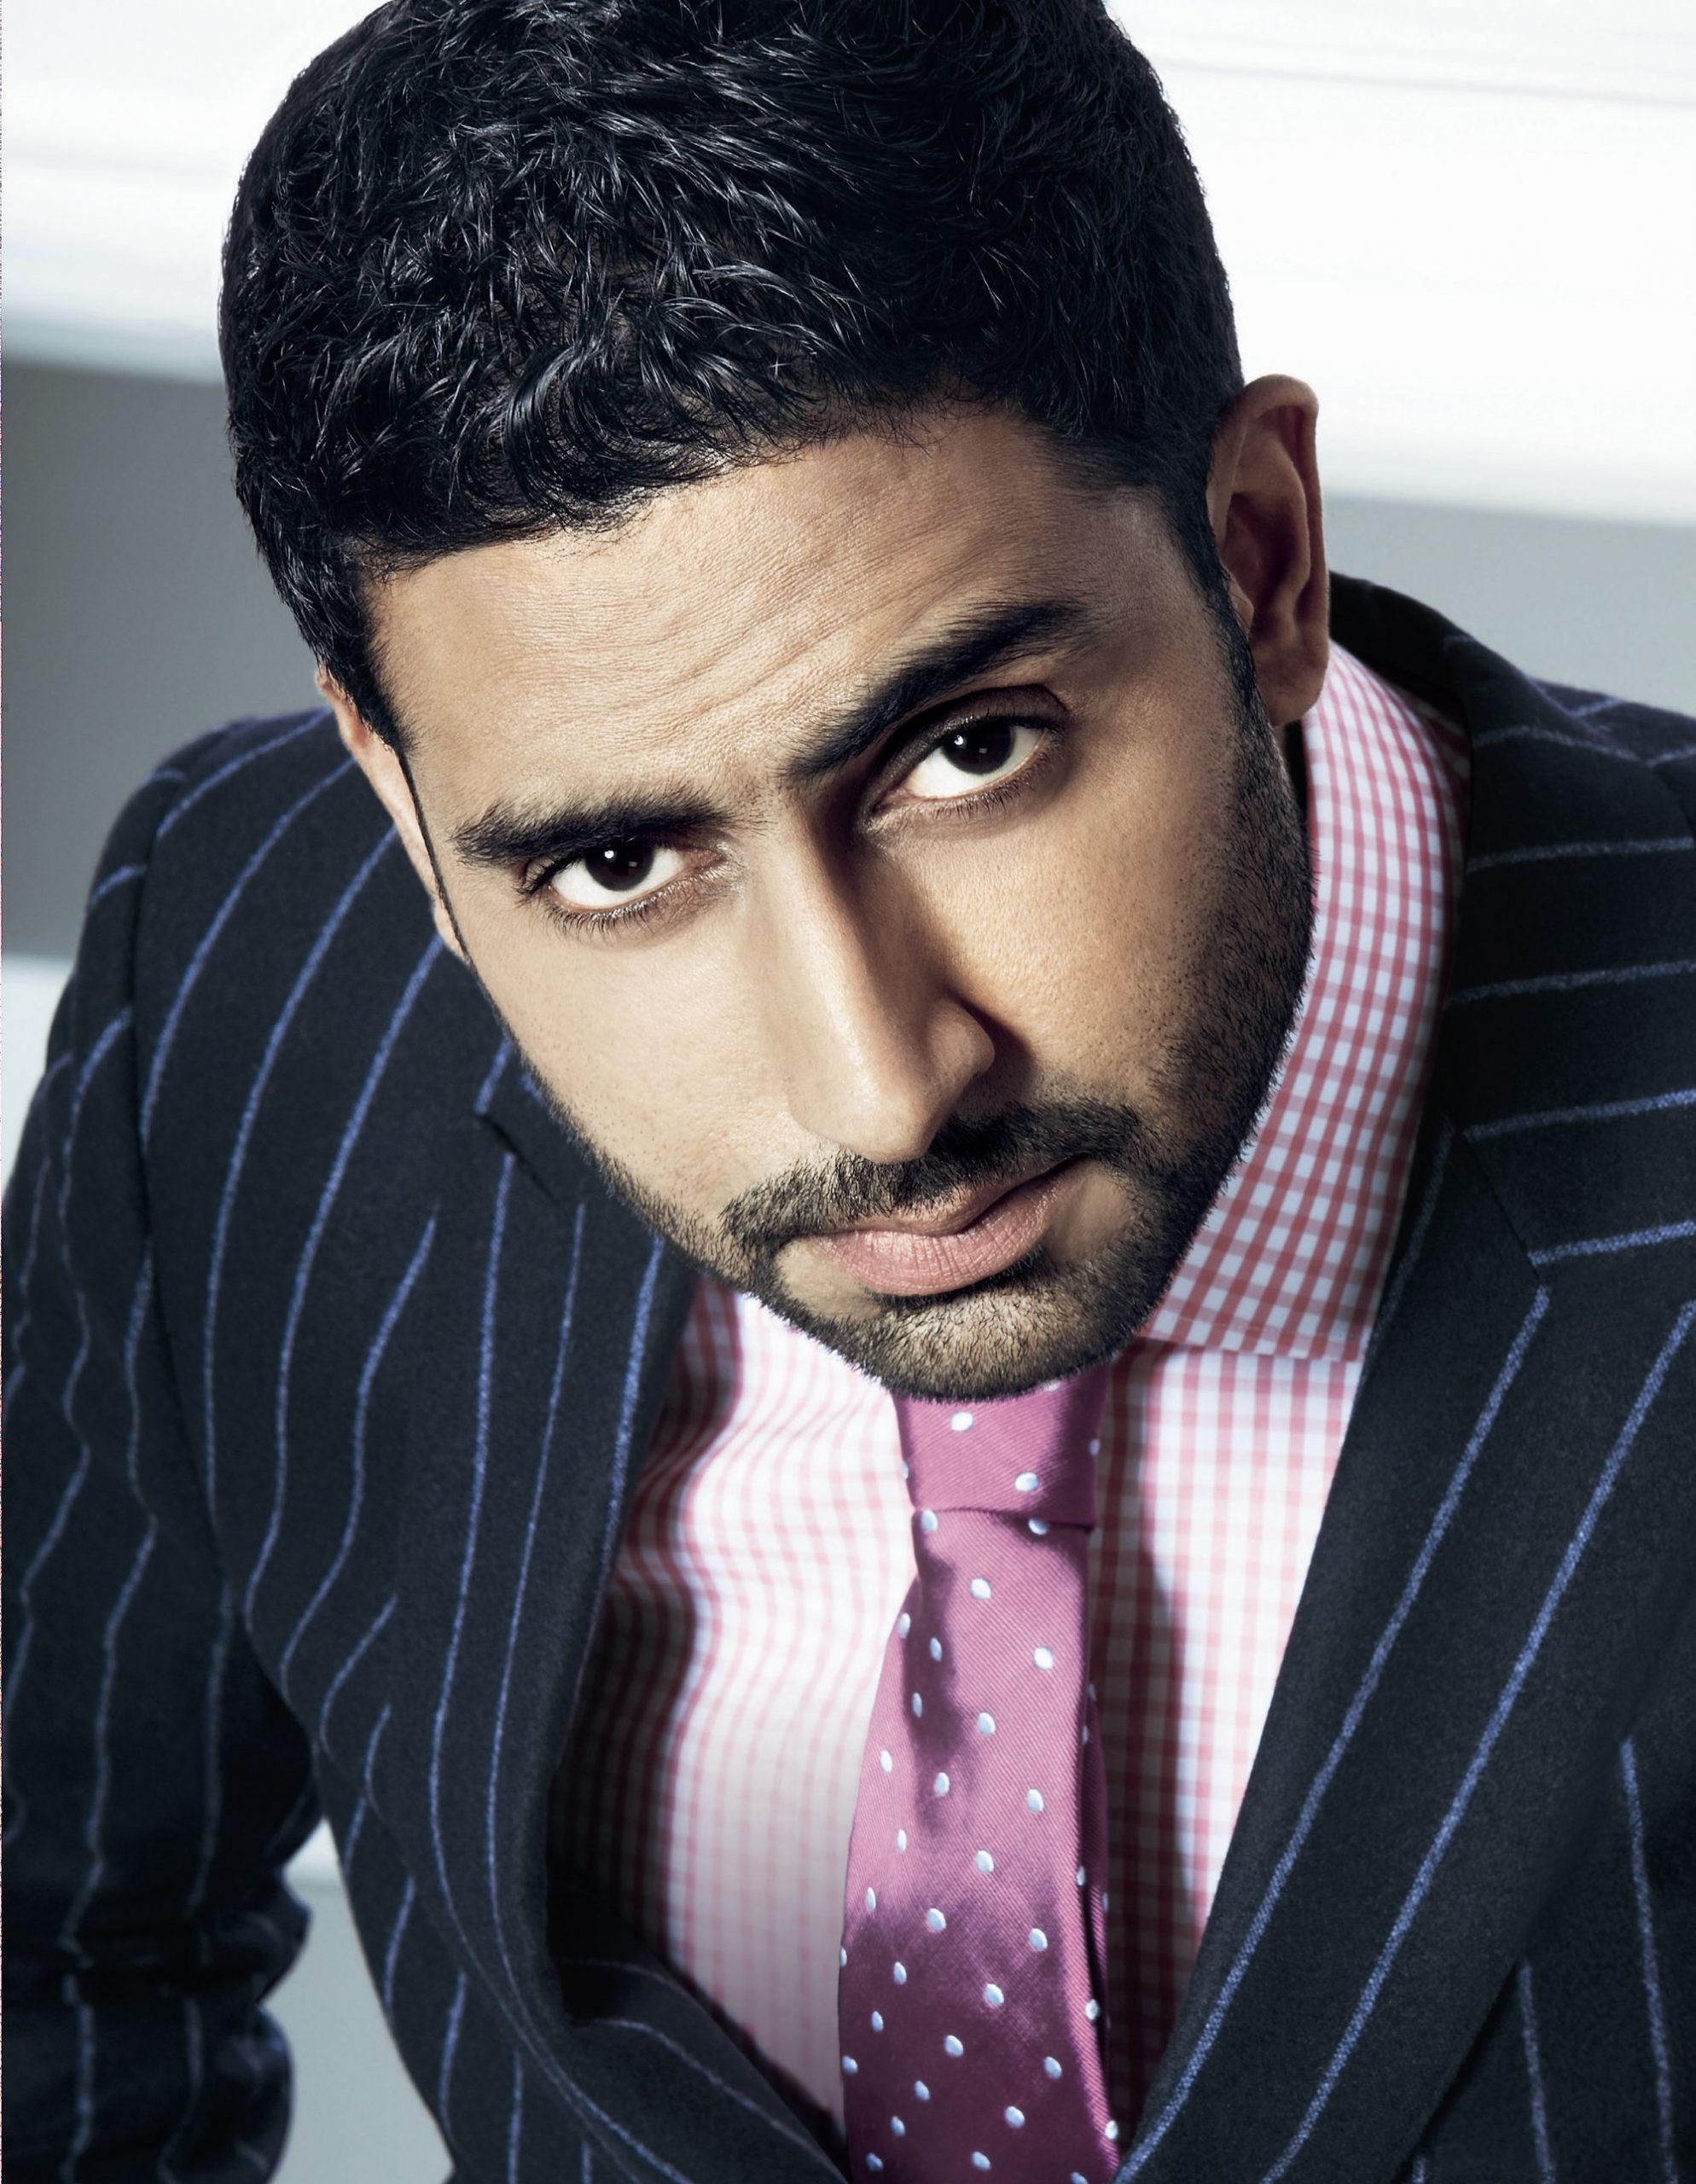 Abhishek Bachchan on the Cover of GQ India!